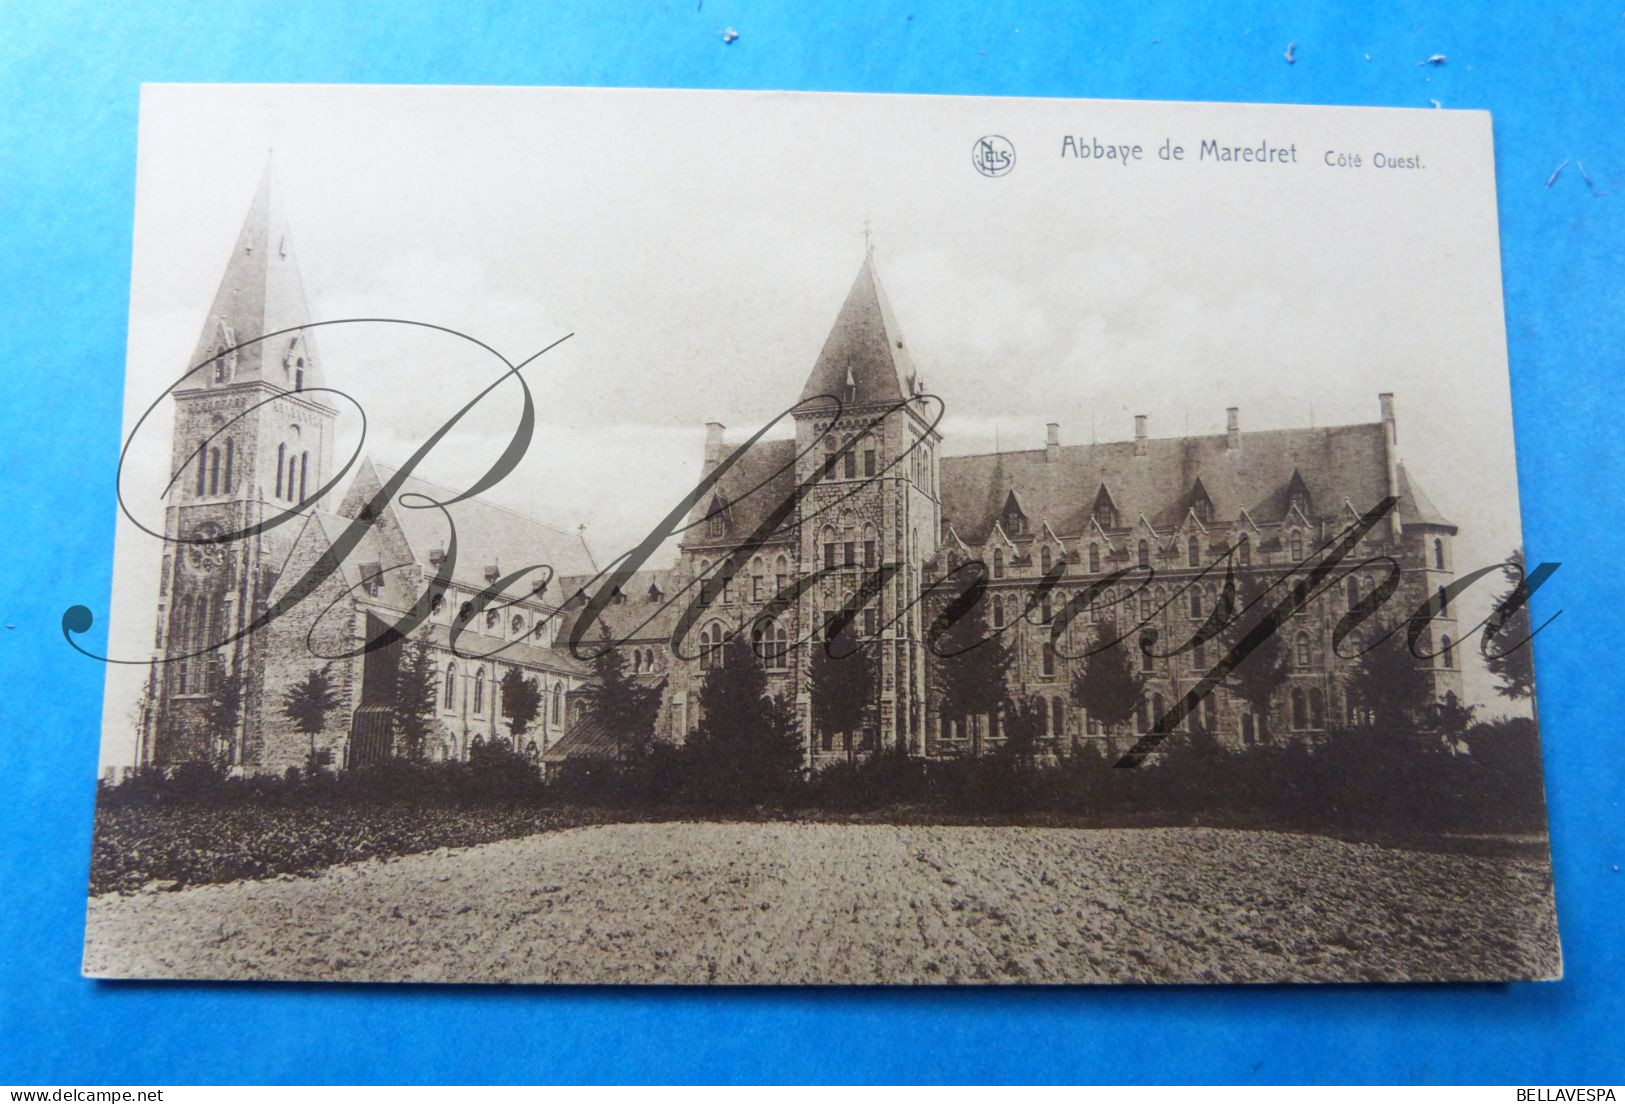 Maredsous Abbaye  ecole x 4 cpa